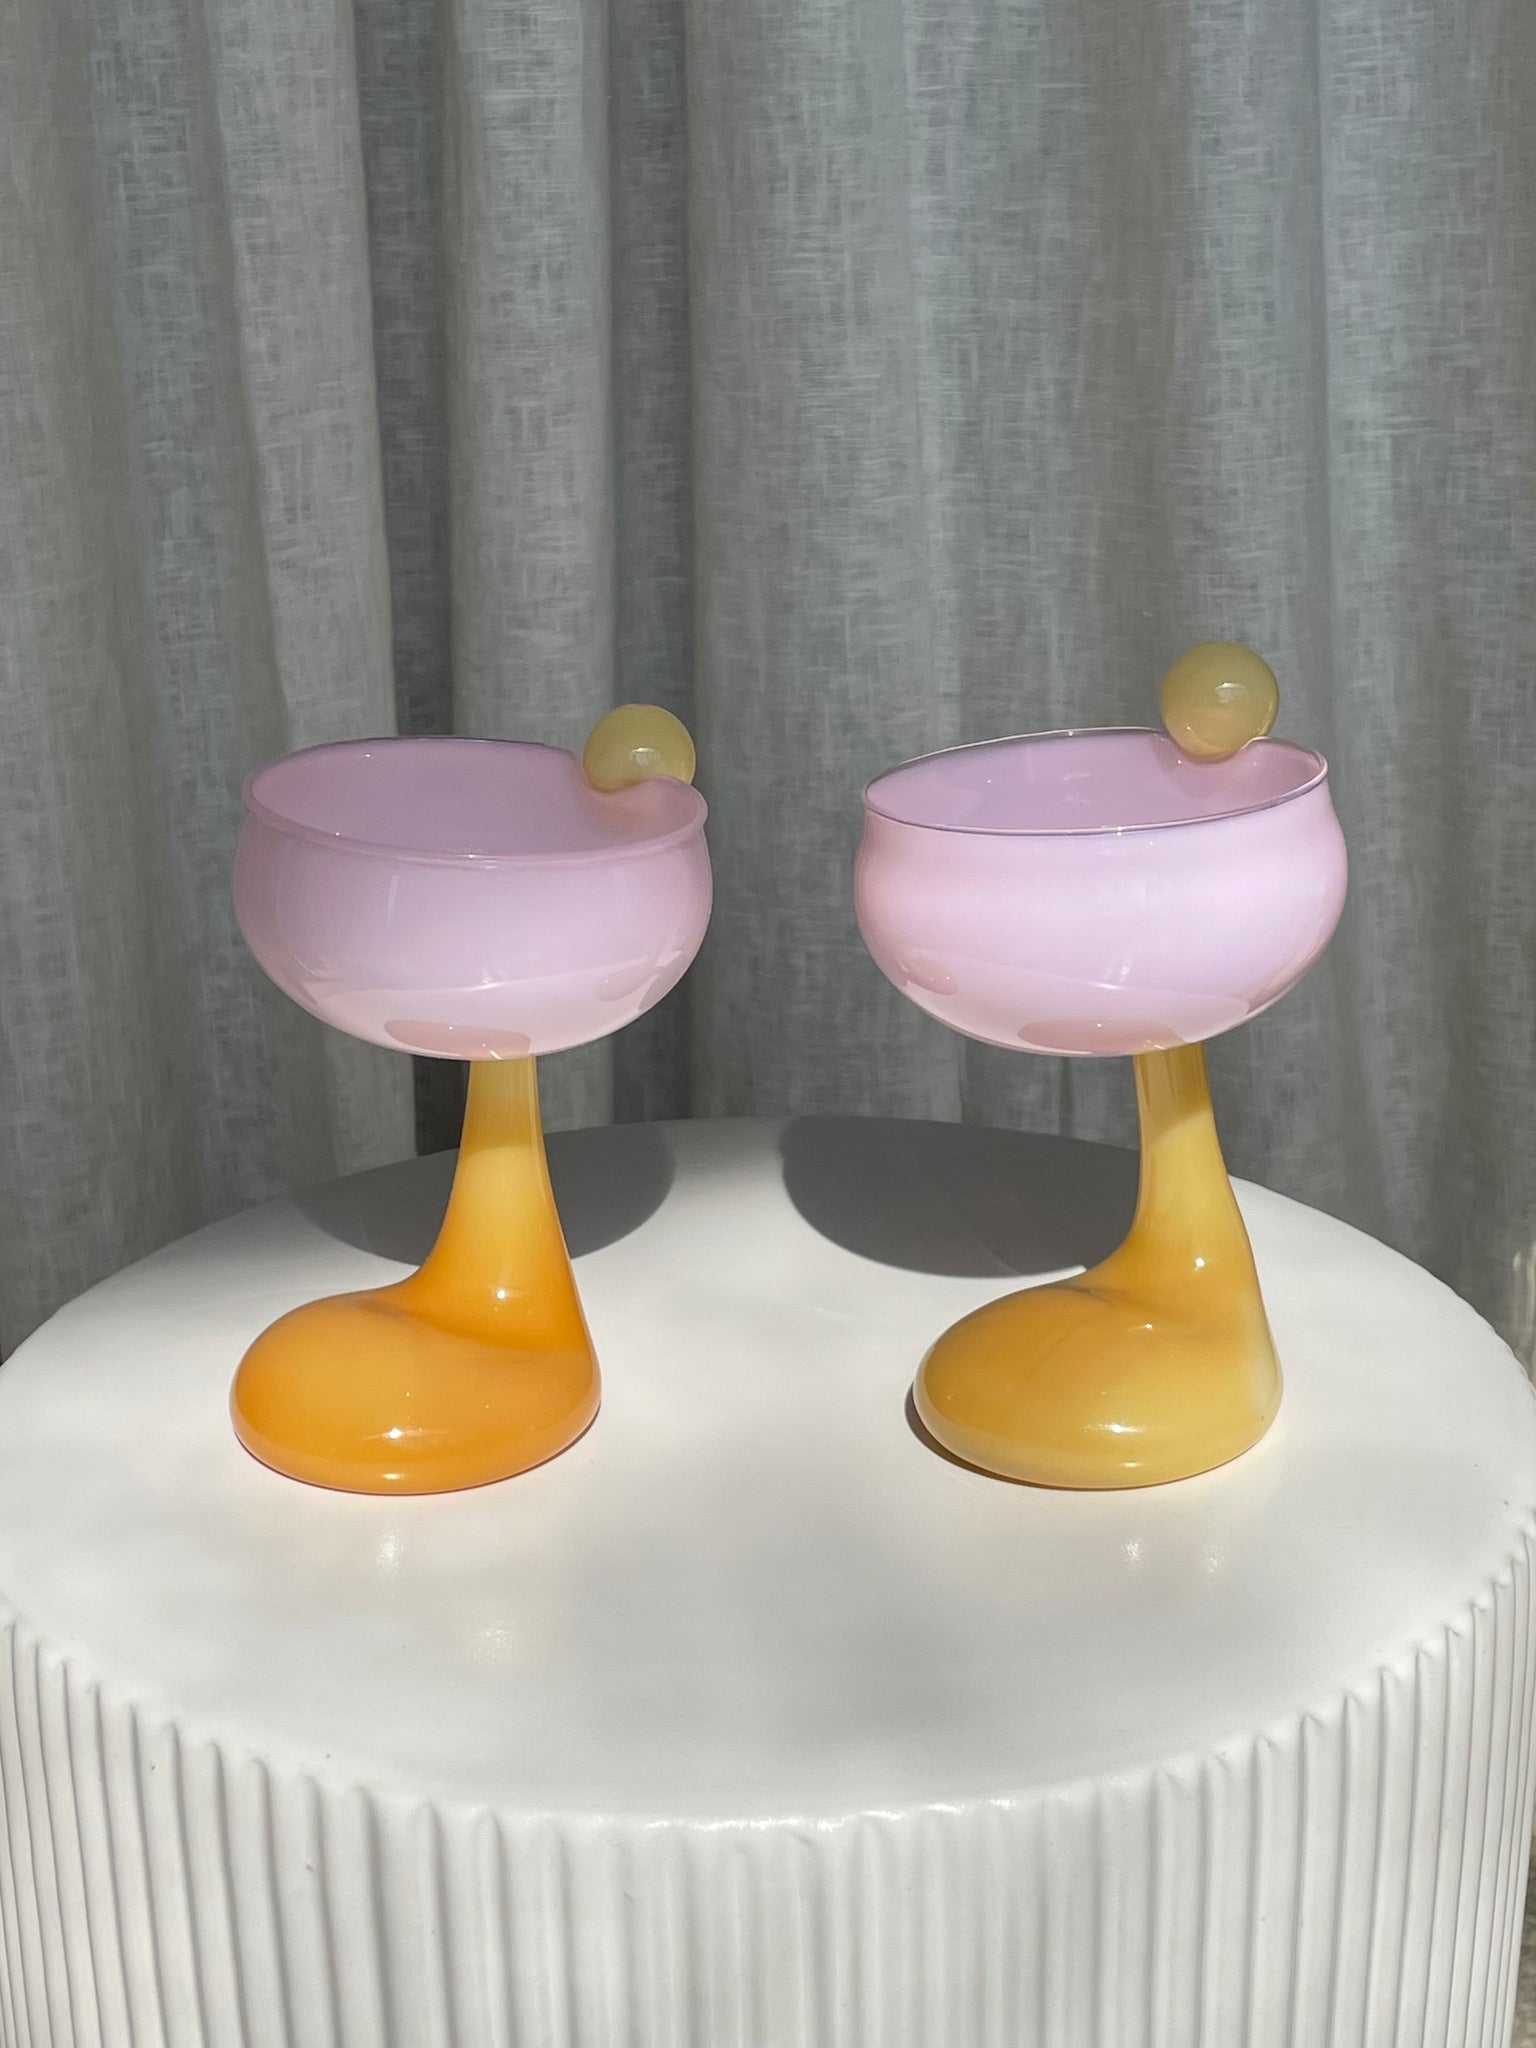 60'S INSPIRED COCKTAIL GLASS SET - PINK